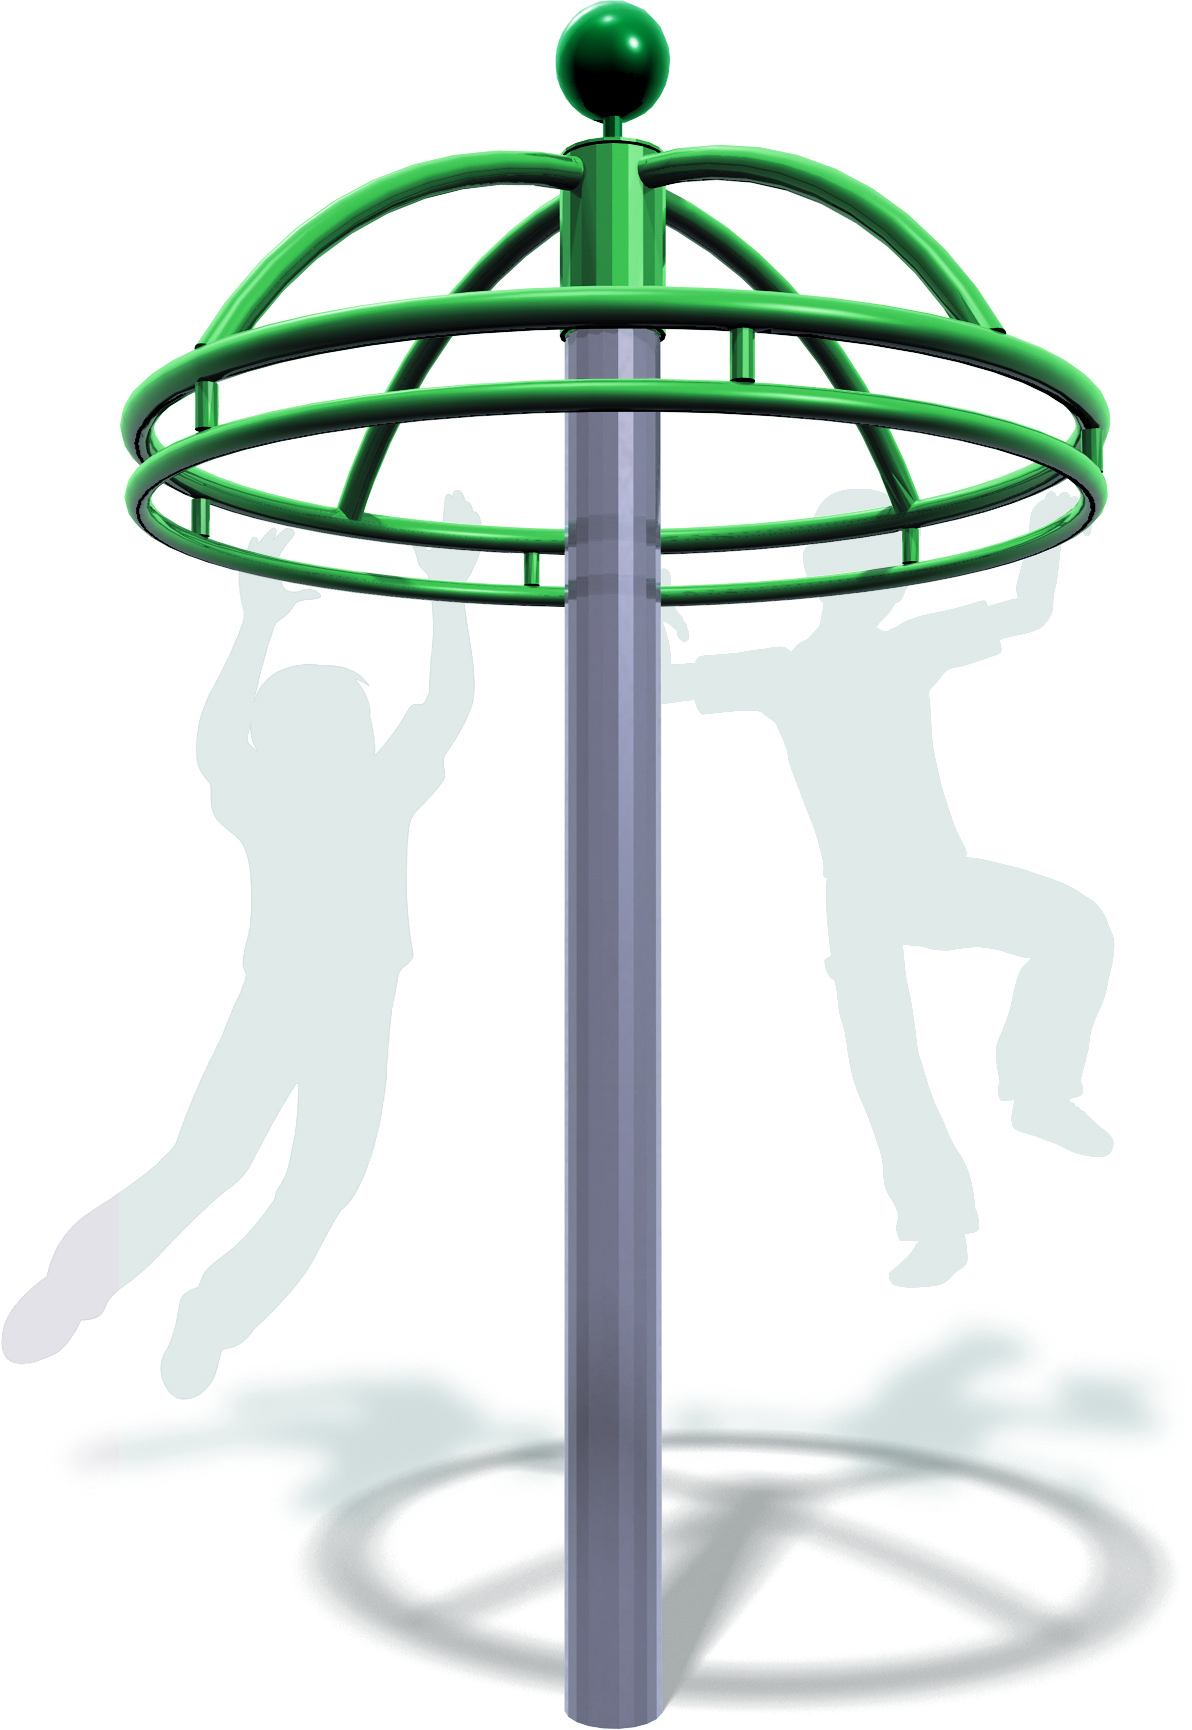 Fly-A-Round | Commercial Playground Equipment | All People Can Play